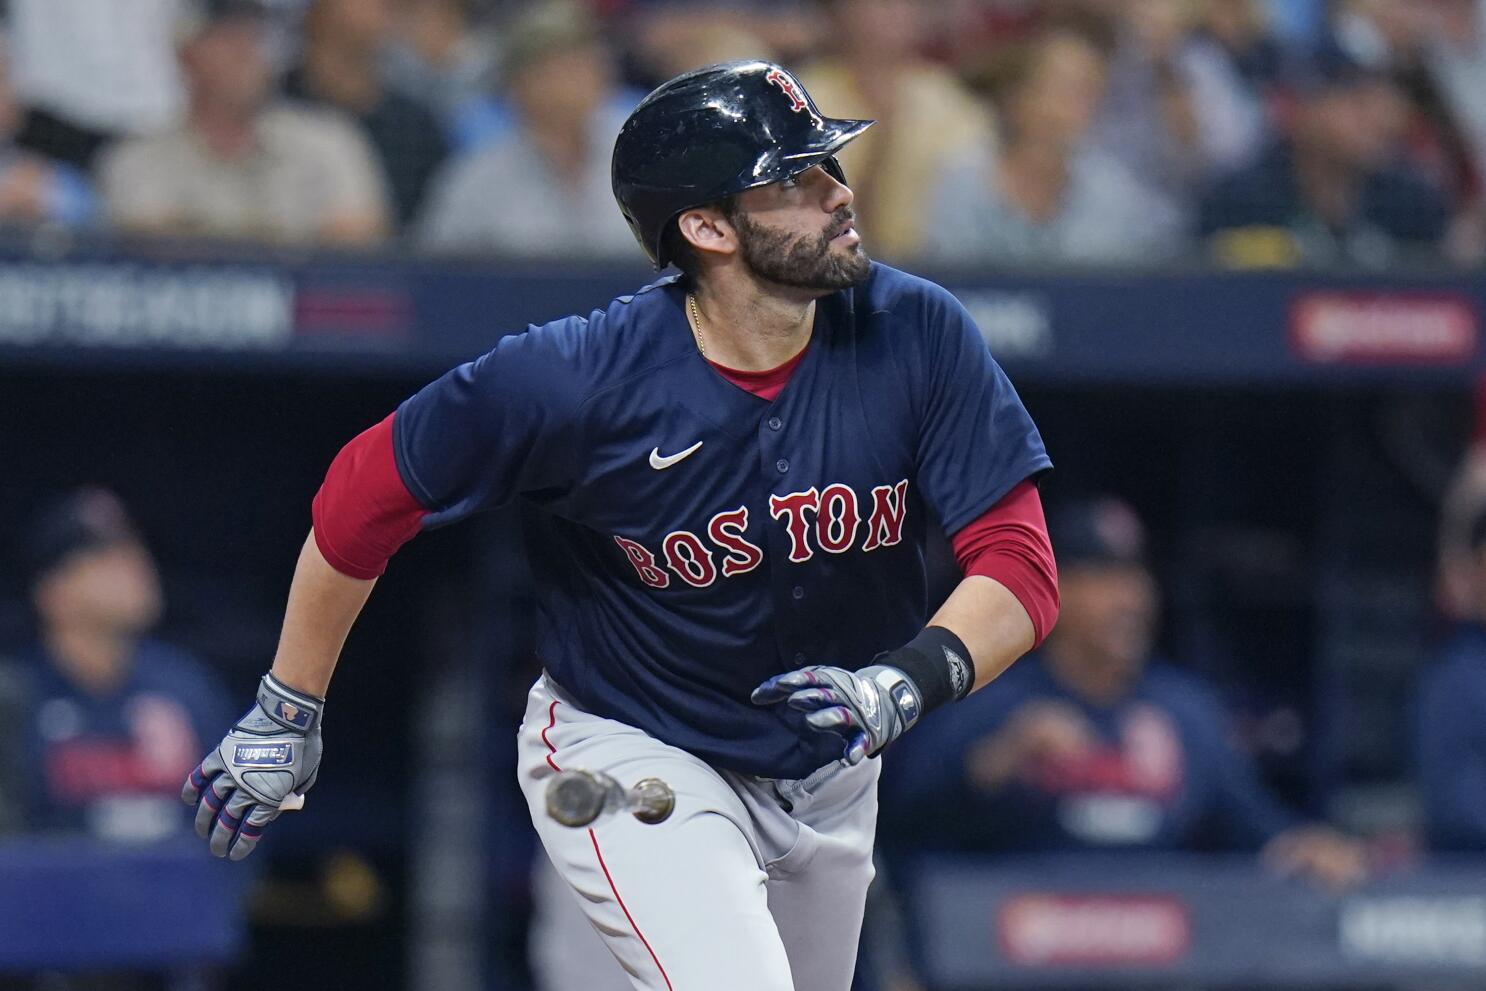 Red Sox starter Nathan Eovaldi gives up 5 HRs in second inning to